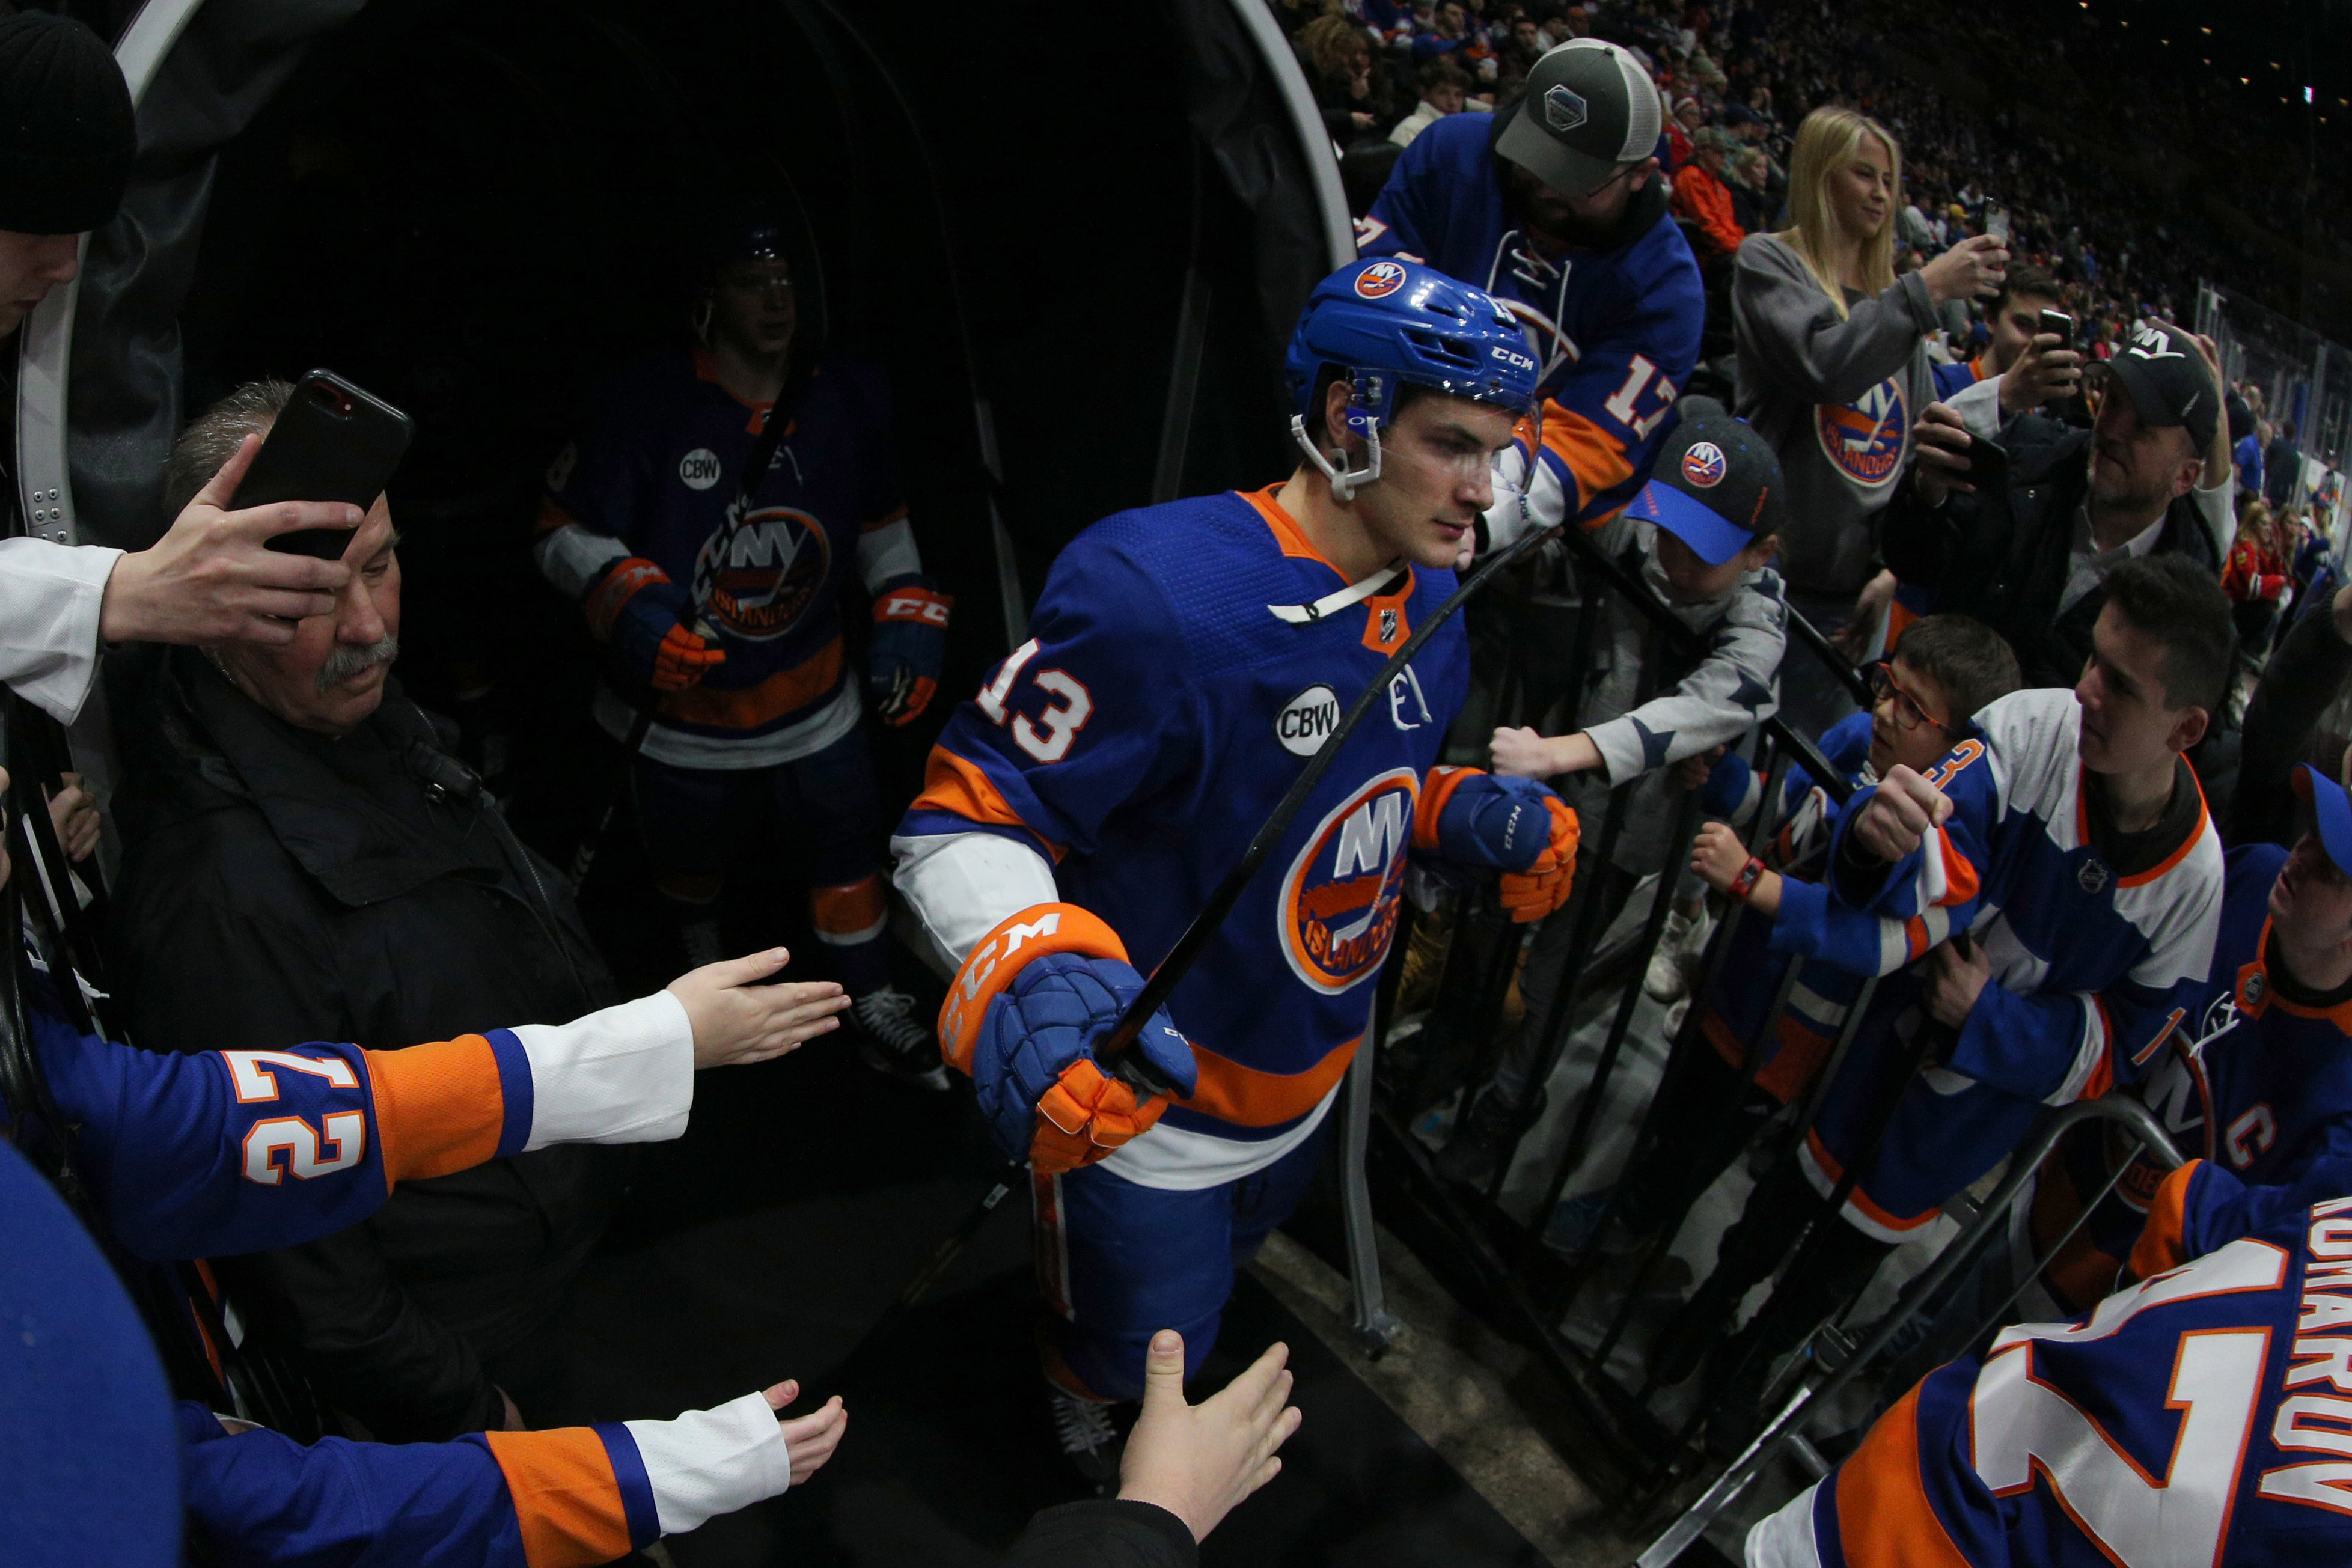 Jan 3, 2019; Uniondale, NY, USA; New York Islanders center Mathew Barzal (13) takes the ice for the second period against the Chicago Blackhawks at Nassau Veterans Memorial Coliseum. Mandatory Credit: Brad Penner-USA TODAY Sports